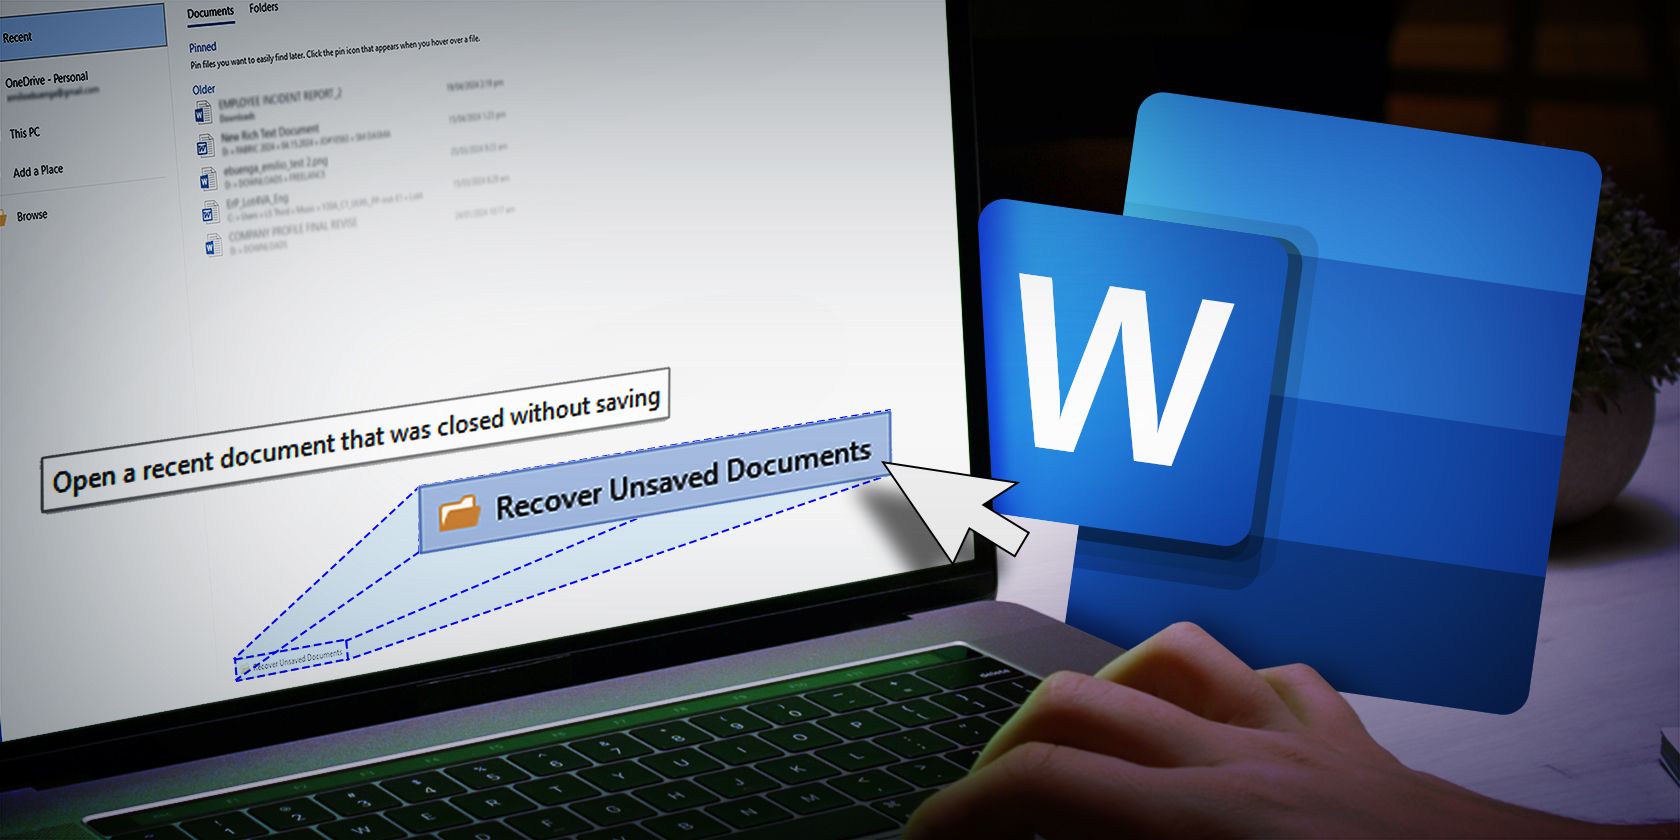 A laptop displaying the Microsoft Word documents interface, and a cursor clicking the “Recover Unsaved Documents” button, with the MS Word logo on the side